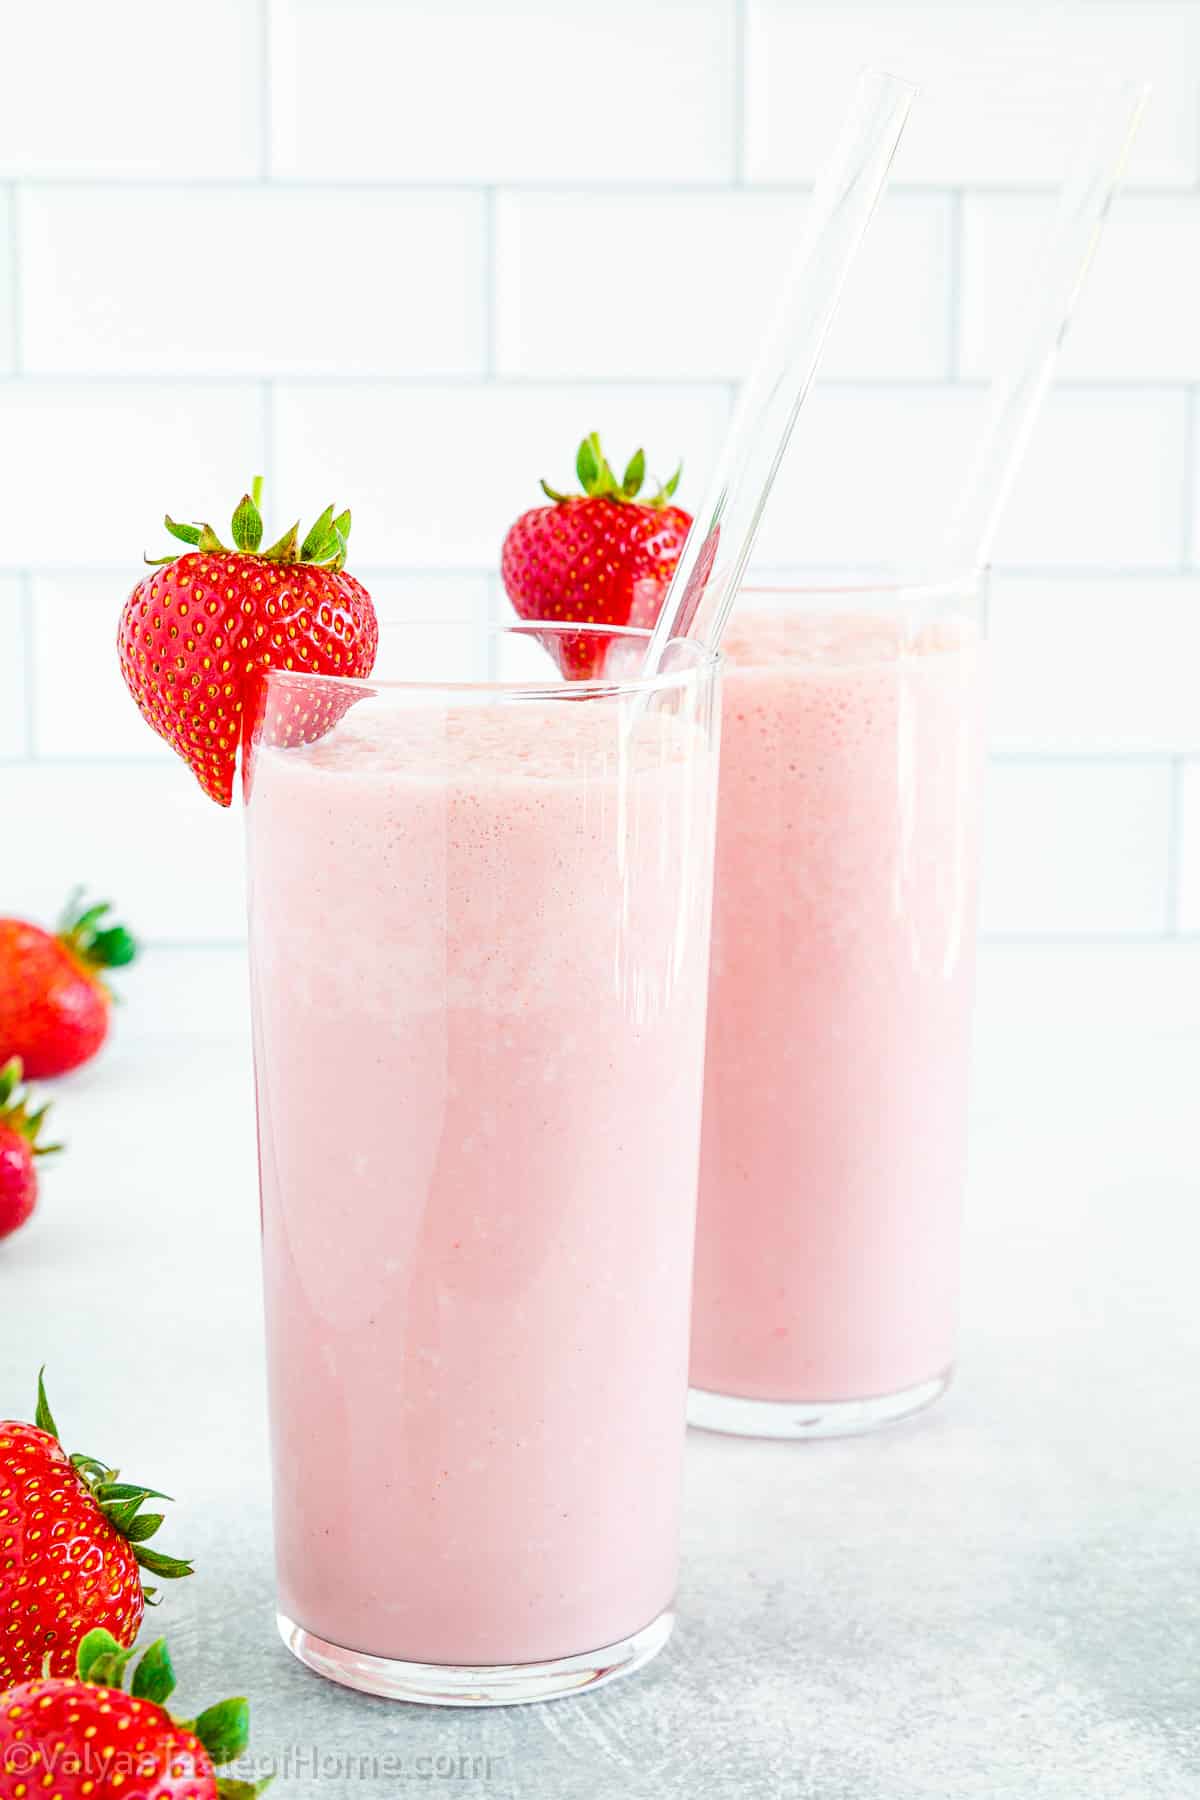 Made with fresh strawberries, creamy yogurt, and a touch of vanilla extract, this smoothie is the perfect blend of sweet and tangy flavors that will leave you feeling satisfied and energized. 